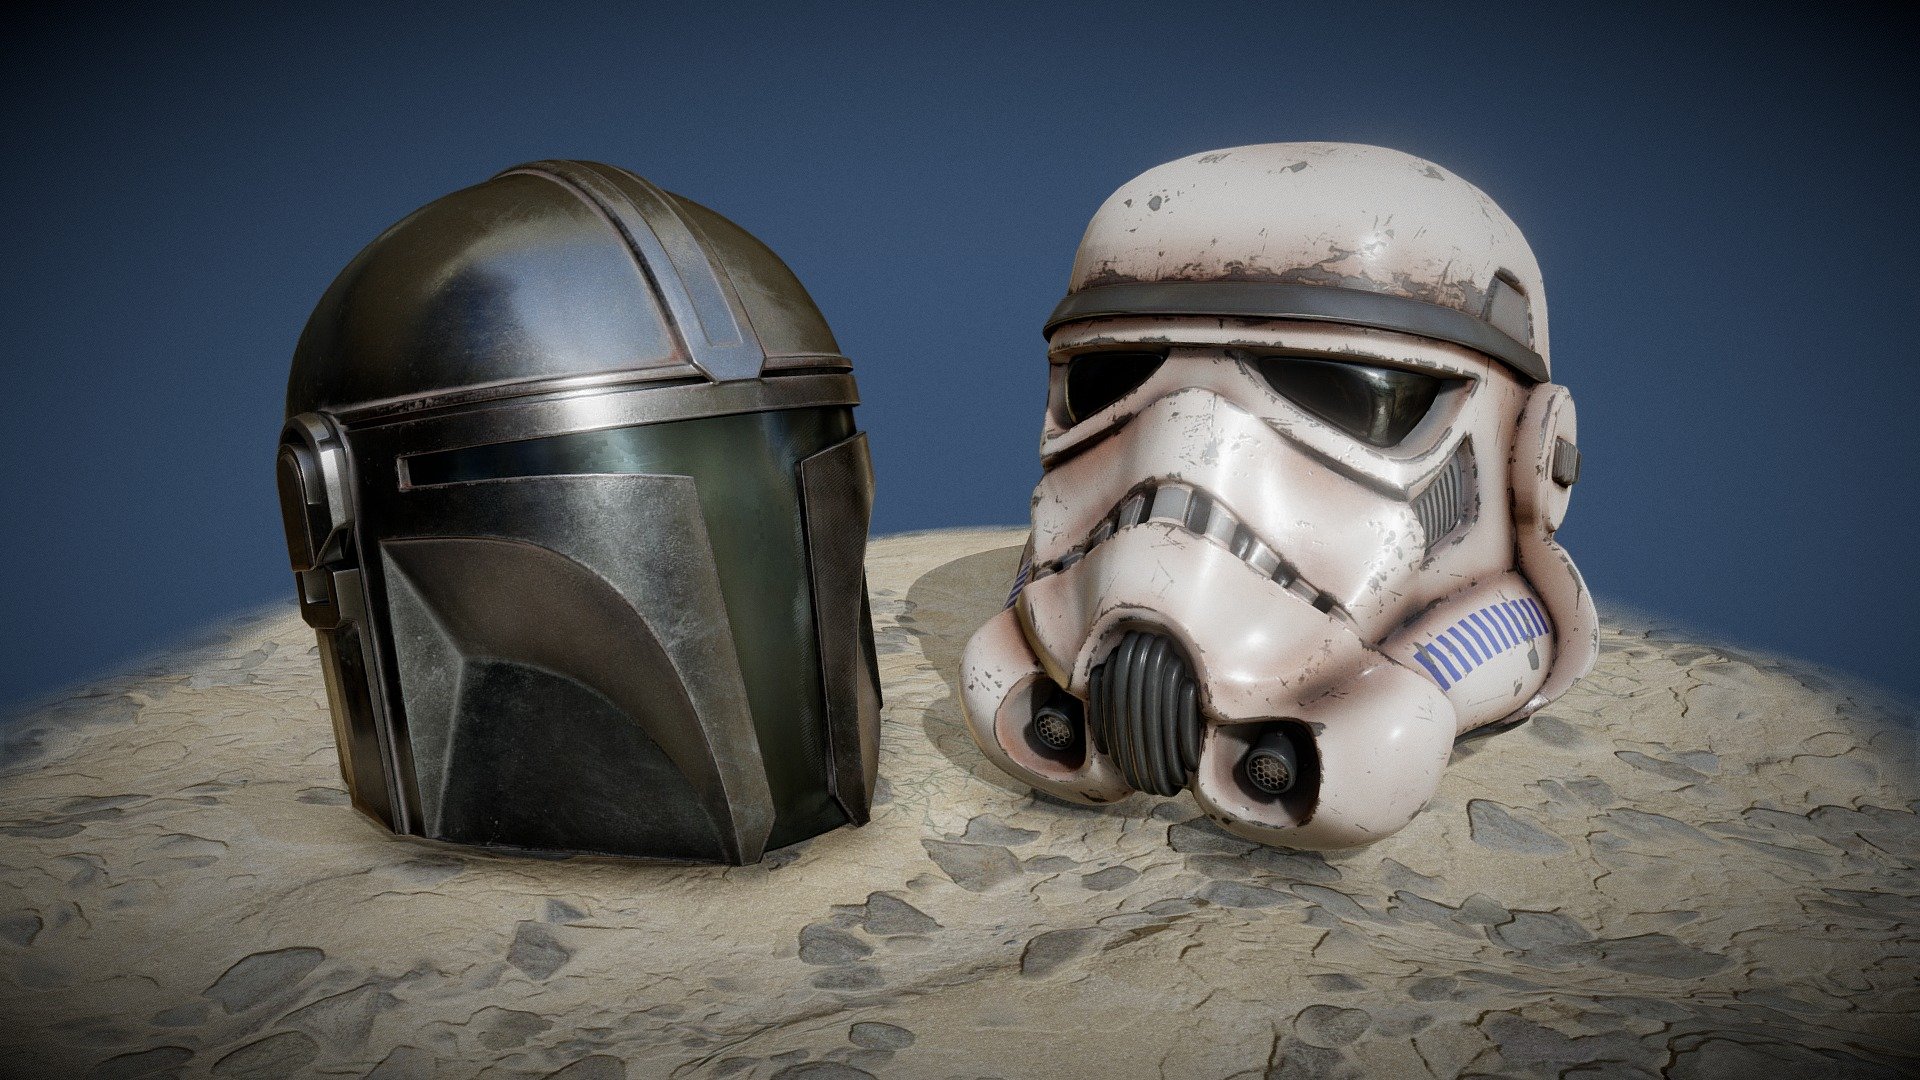 Mandalorian and Stormtrooper helmets from Star Wars. Inspired by The Mandalorian tv-series.

Made with Blender, Substance Painter 3d model